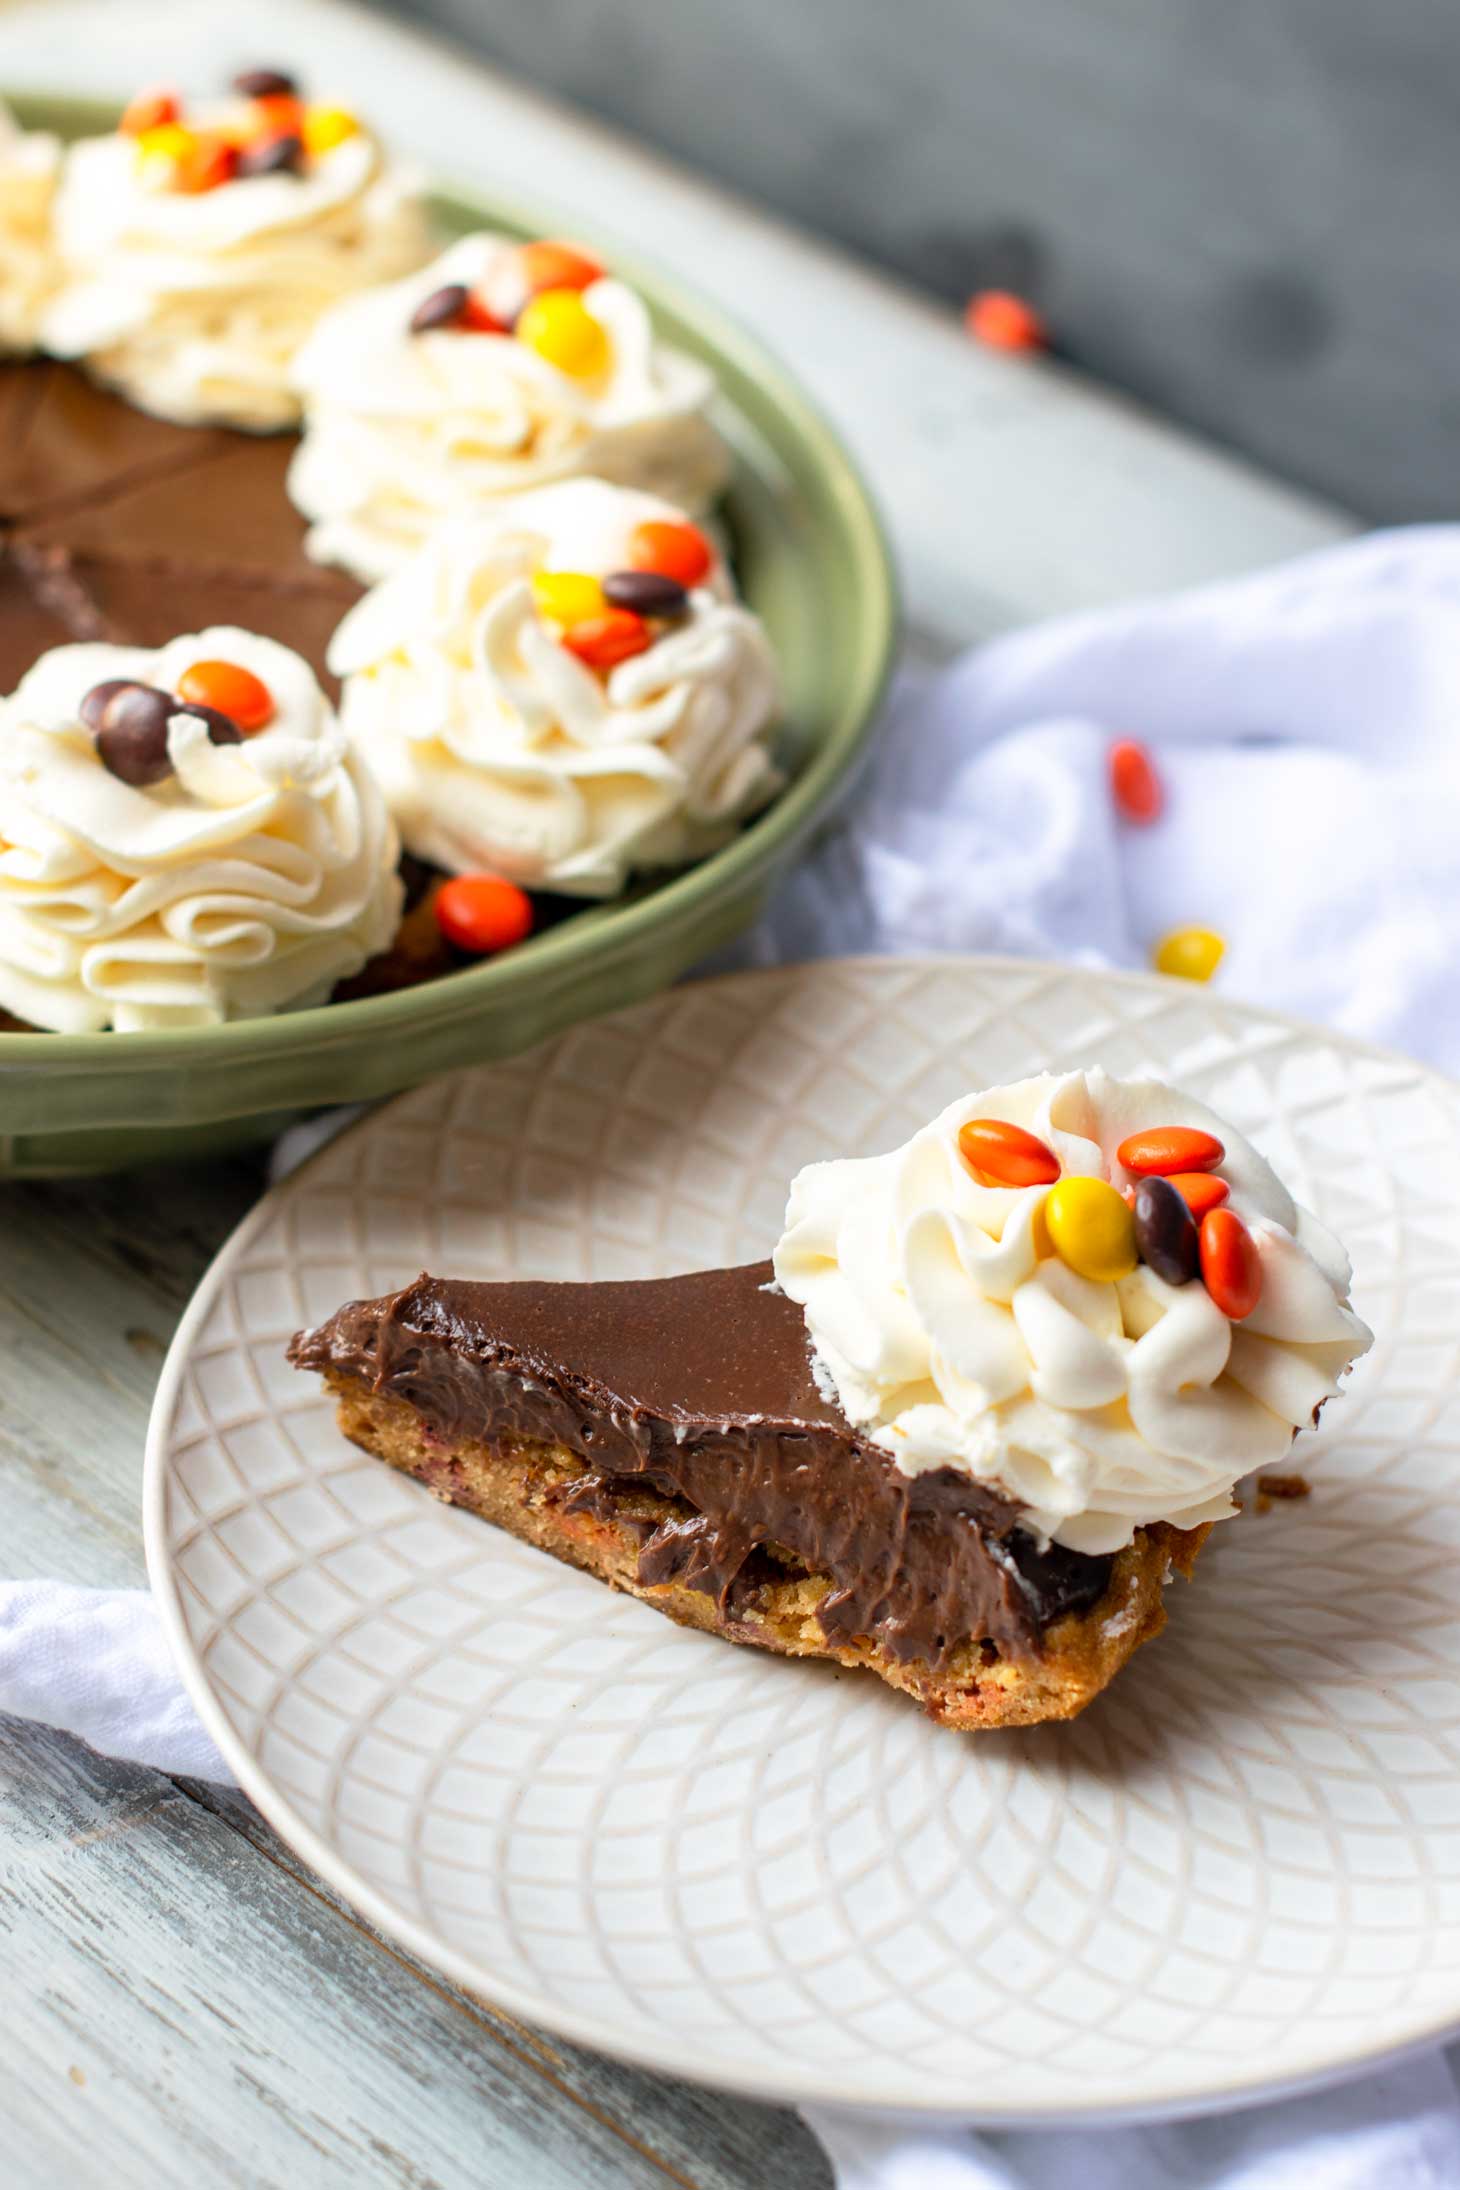 Reese's pie is a simple peanut butter pie with stabilized whipped cream flowers and Reese's Pieces